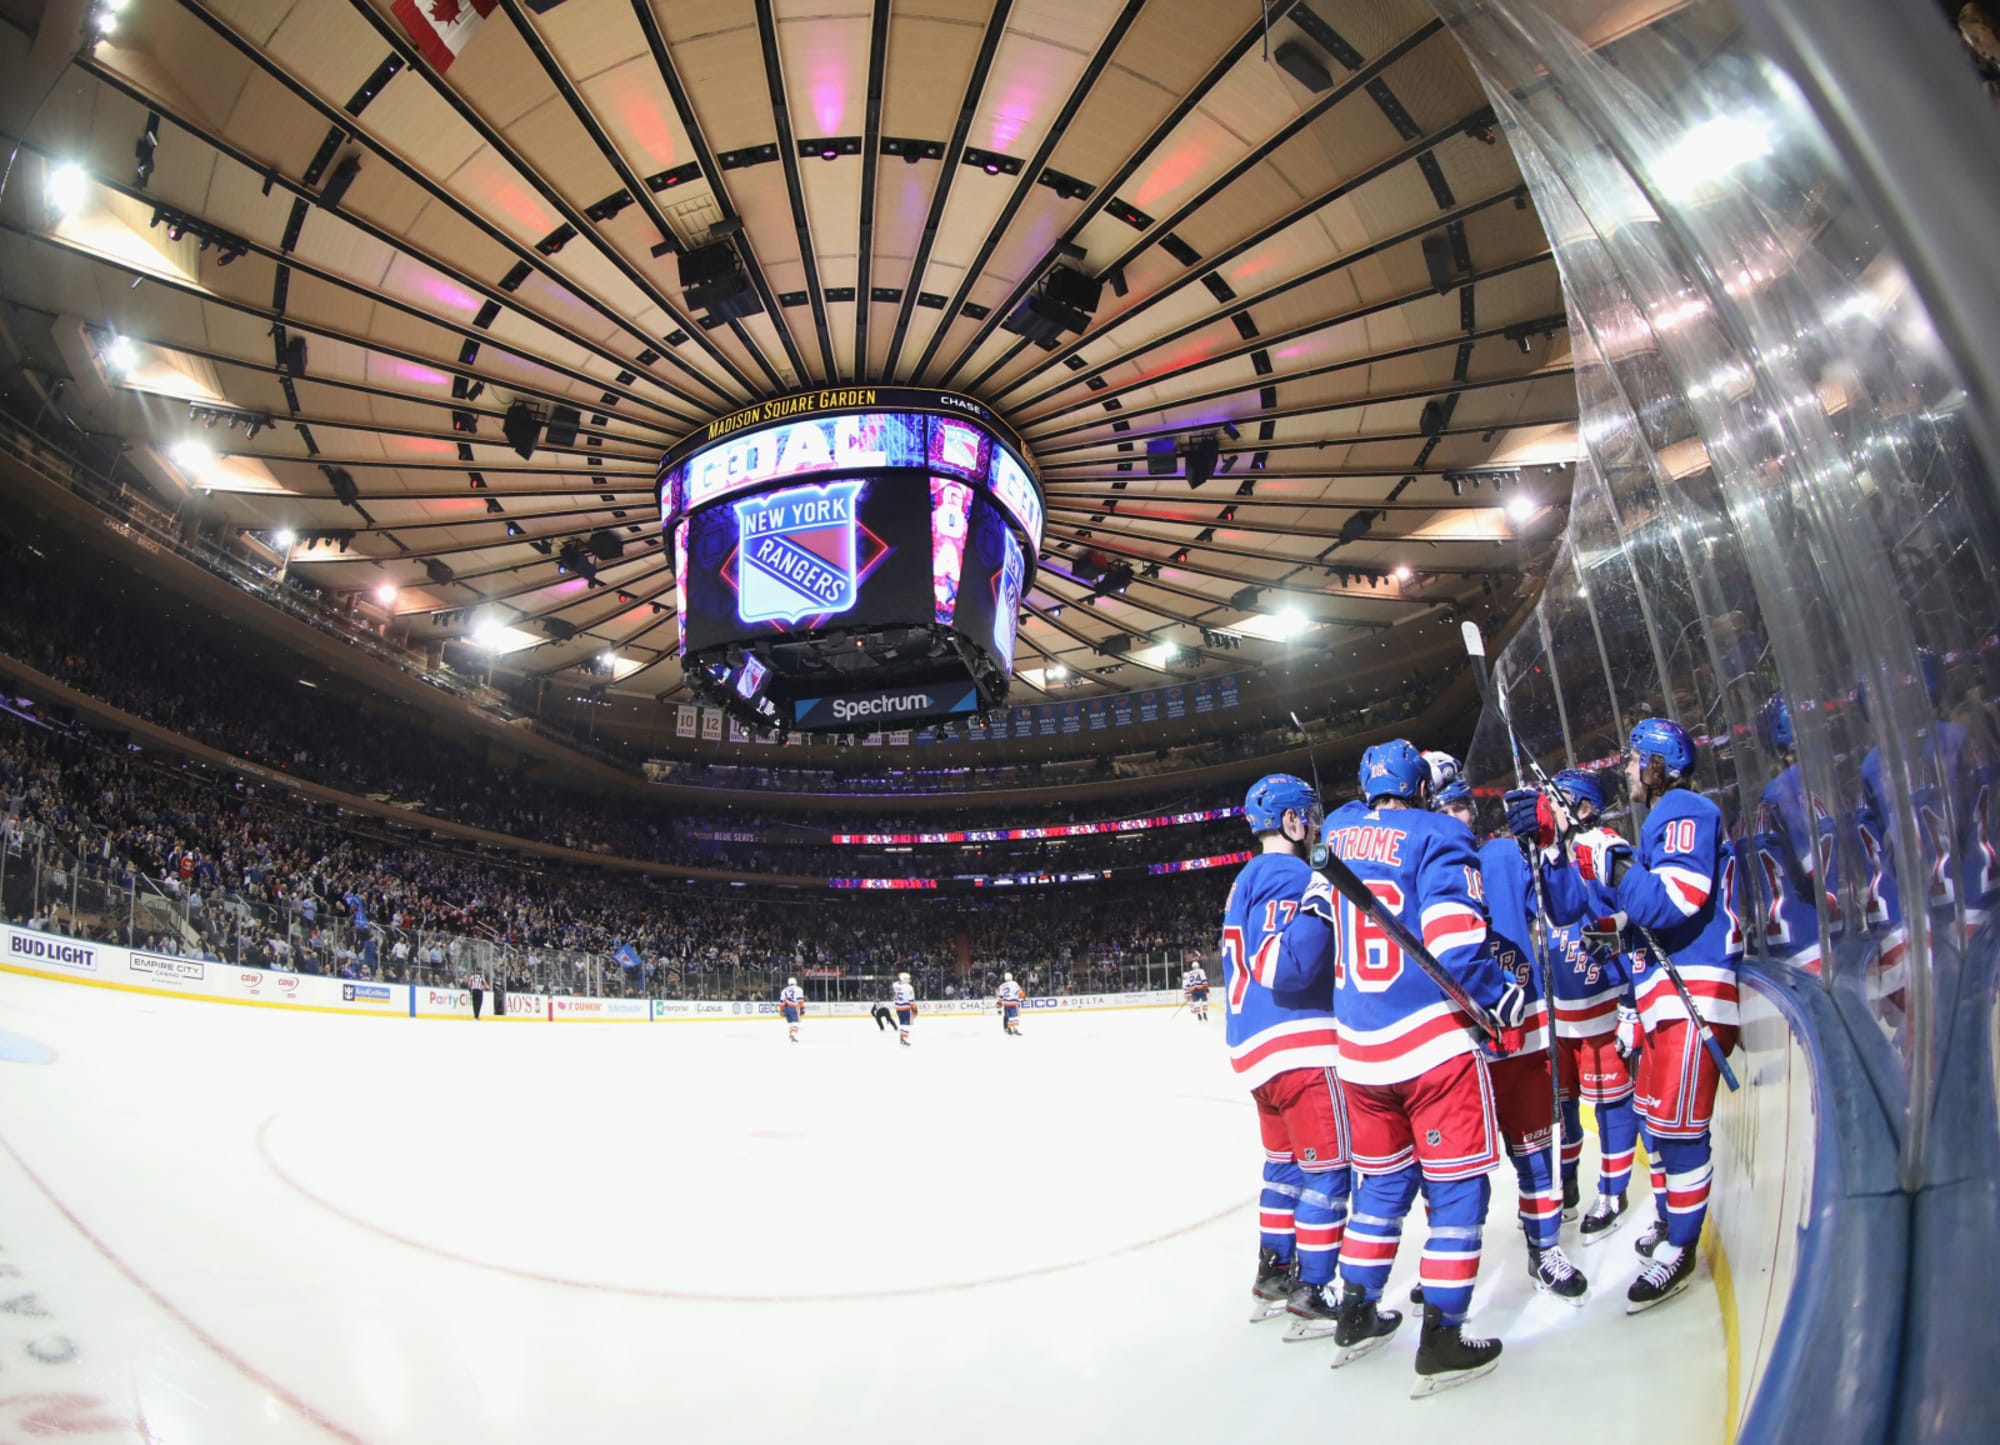 The New York Rangers Here we go, to the playoffs!